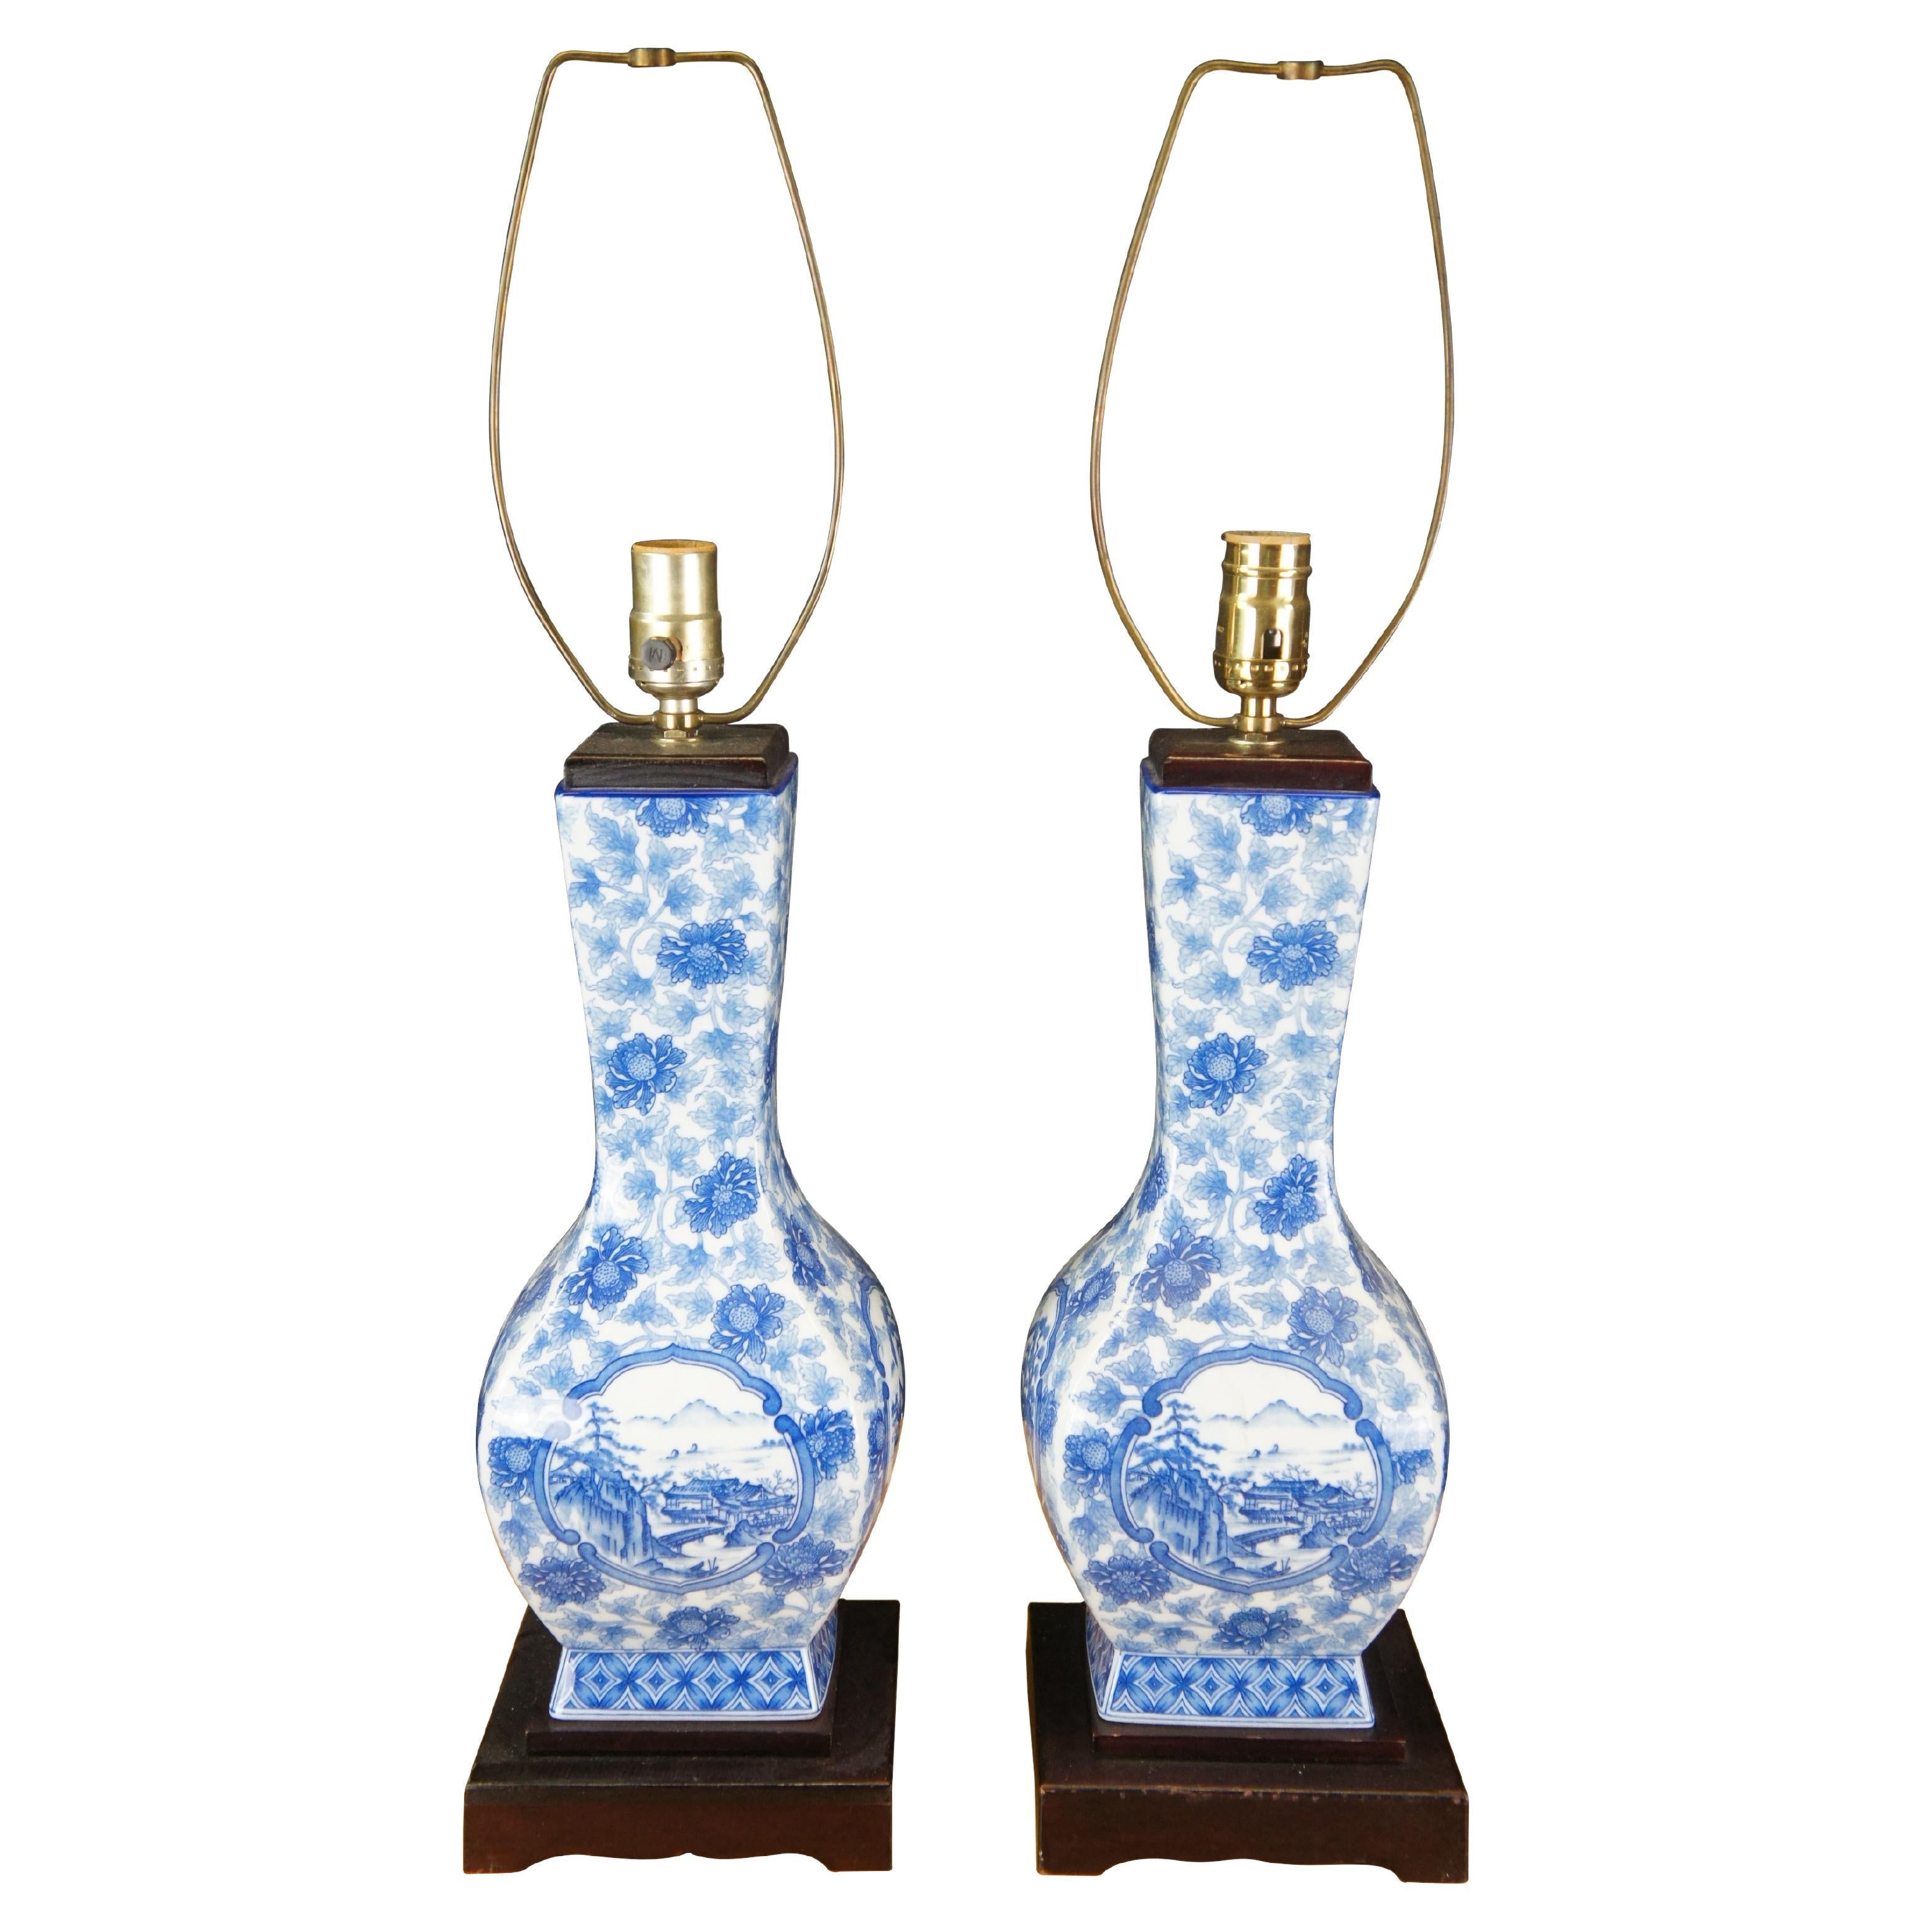 Chinese Blue & White Porcelain Urn Chrysanthemums Pagoda Landscape Table Lamps